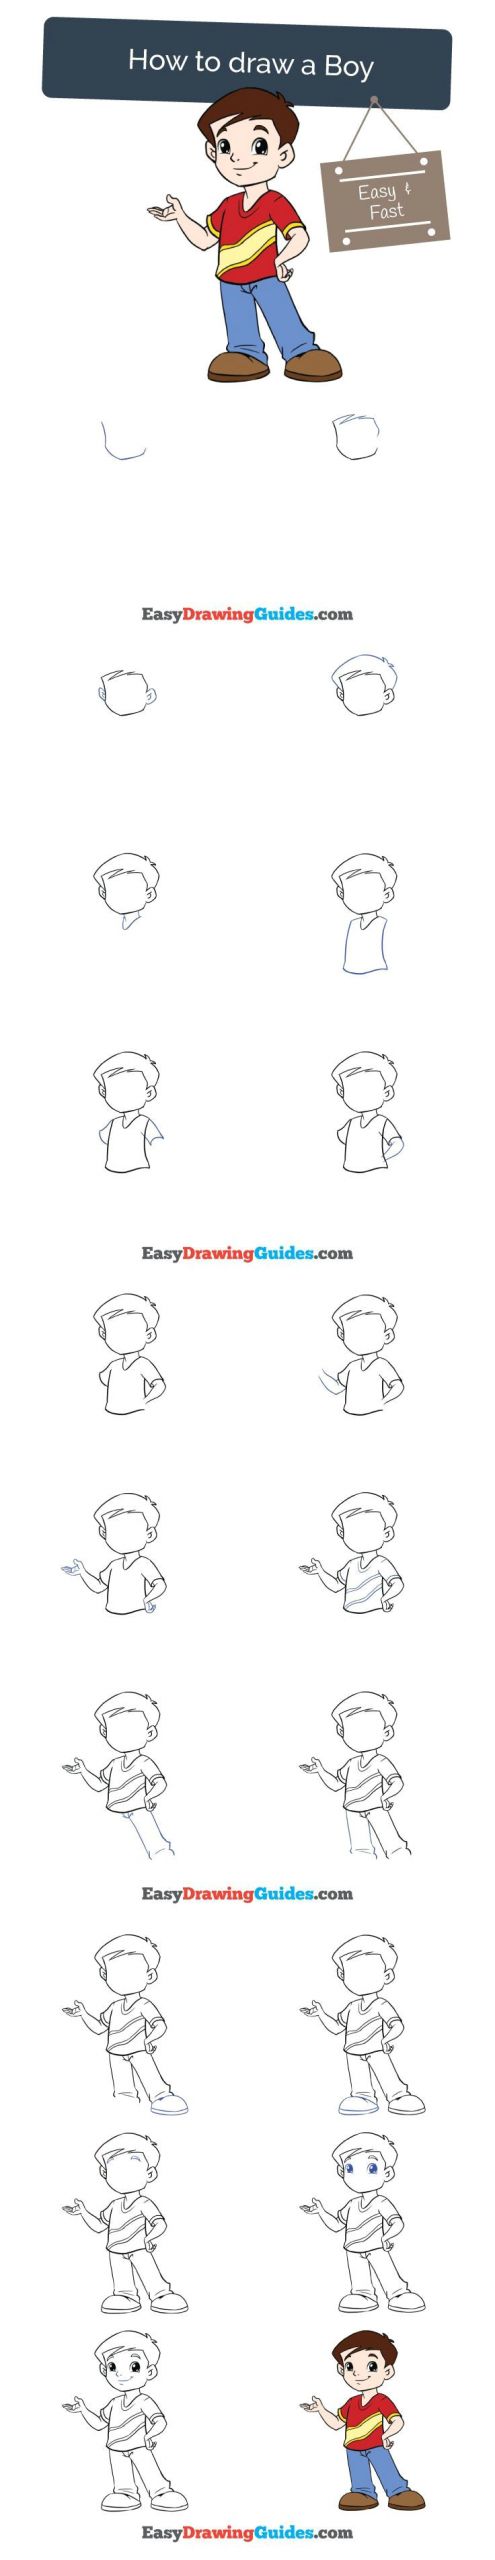 Boy Easy Drawing How to Draw A Boy Drawing Tutorials for Kids Easy